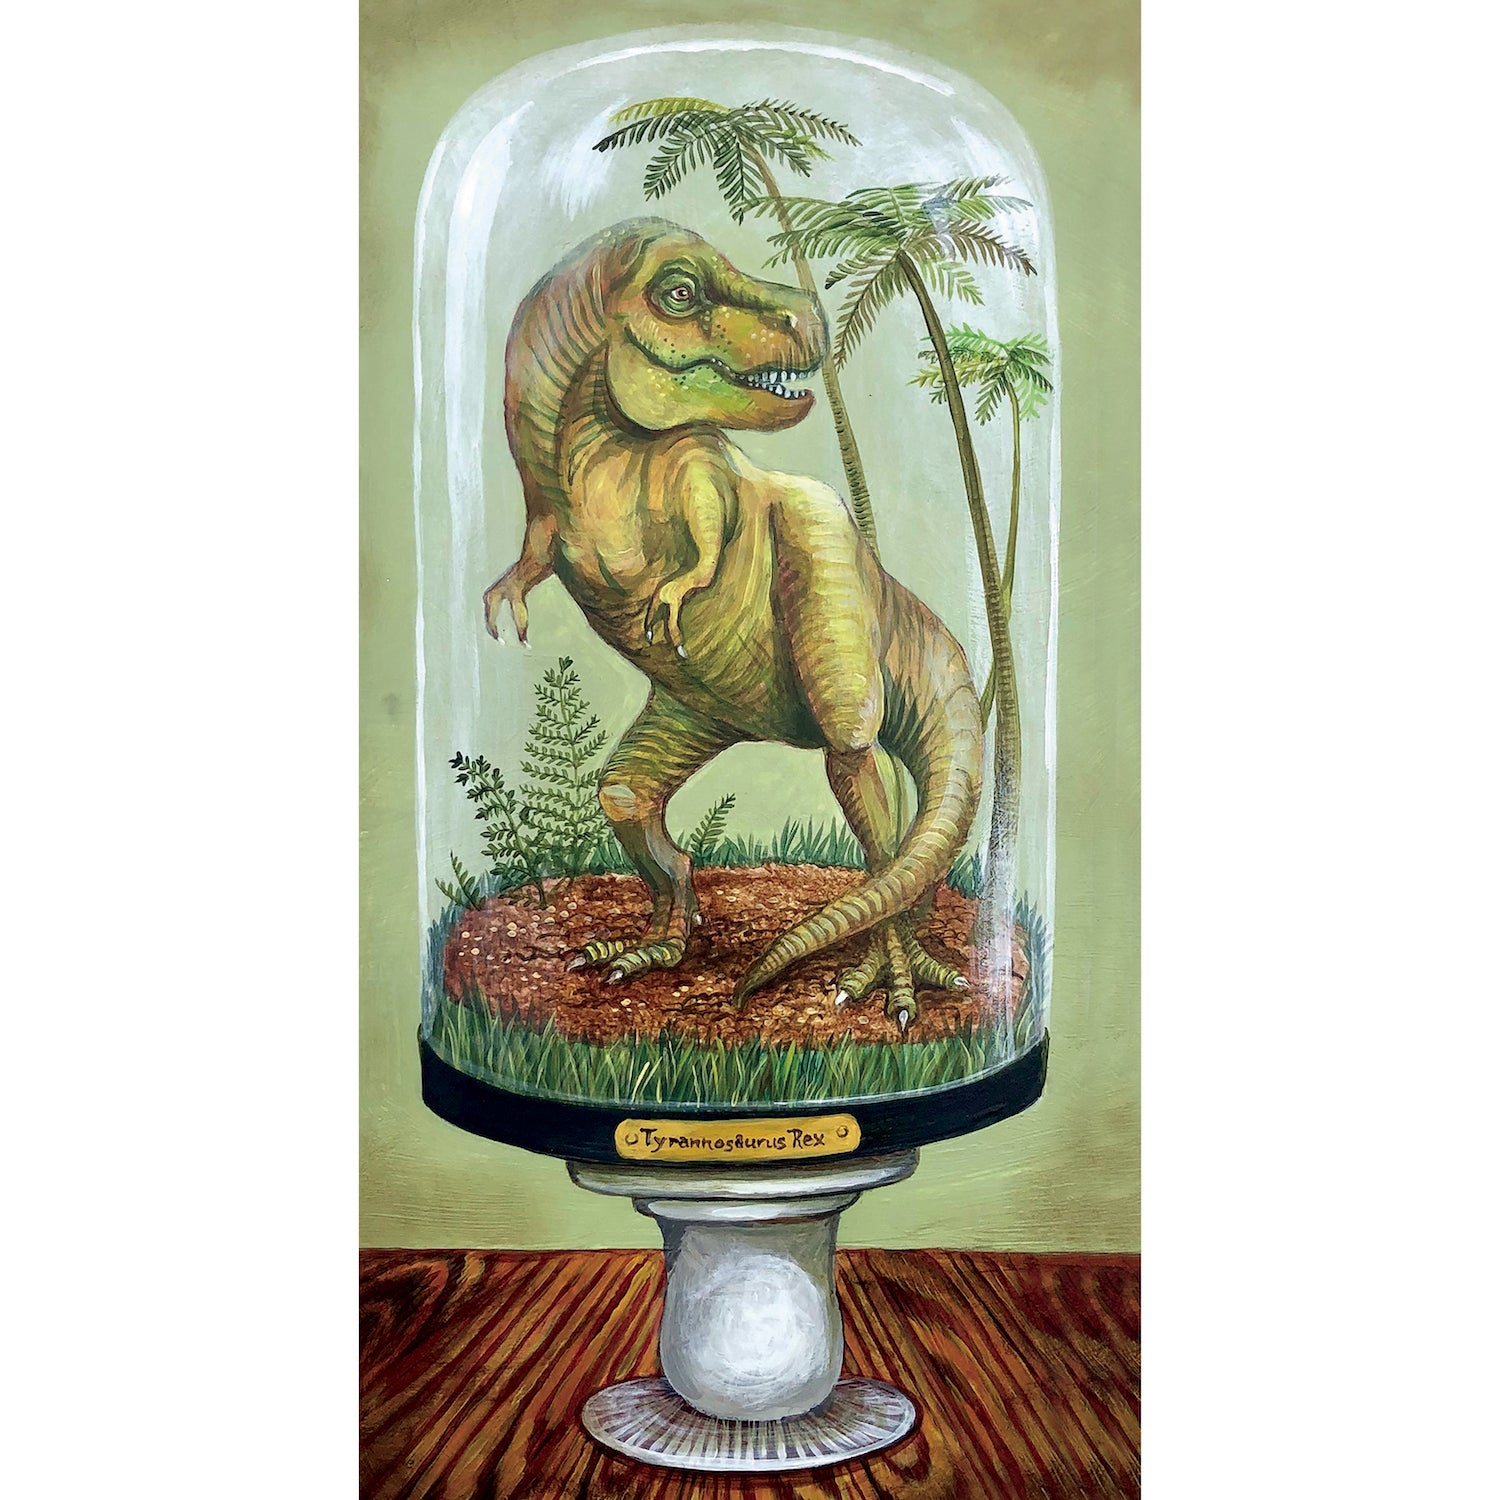 A T-Rex Card from Hester &amp; Cook, featuring a painting of a t-rex under a glass dome, inspired by fairytales.